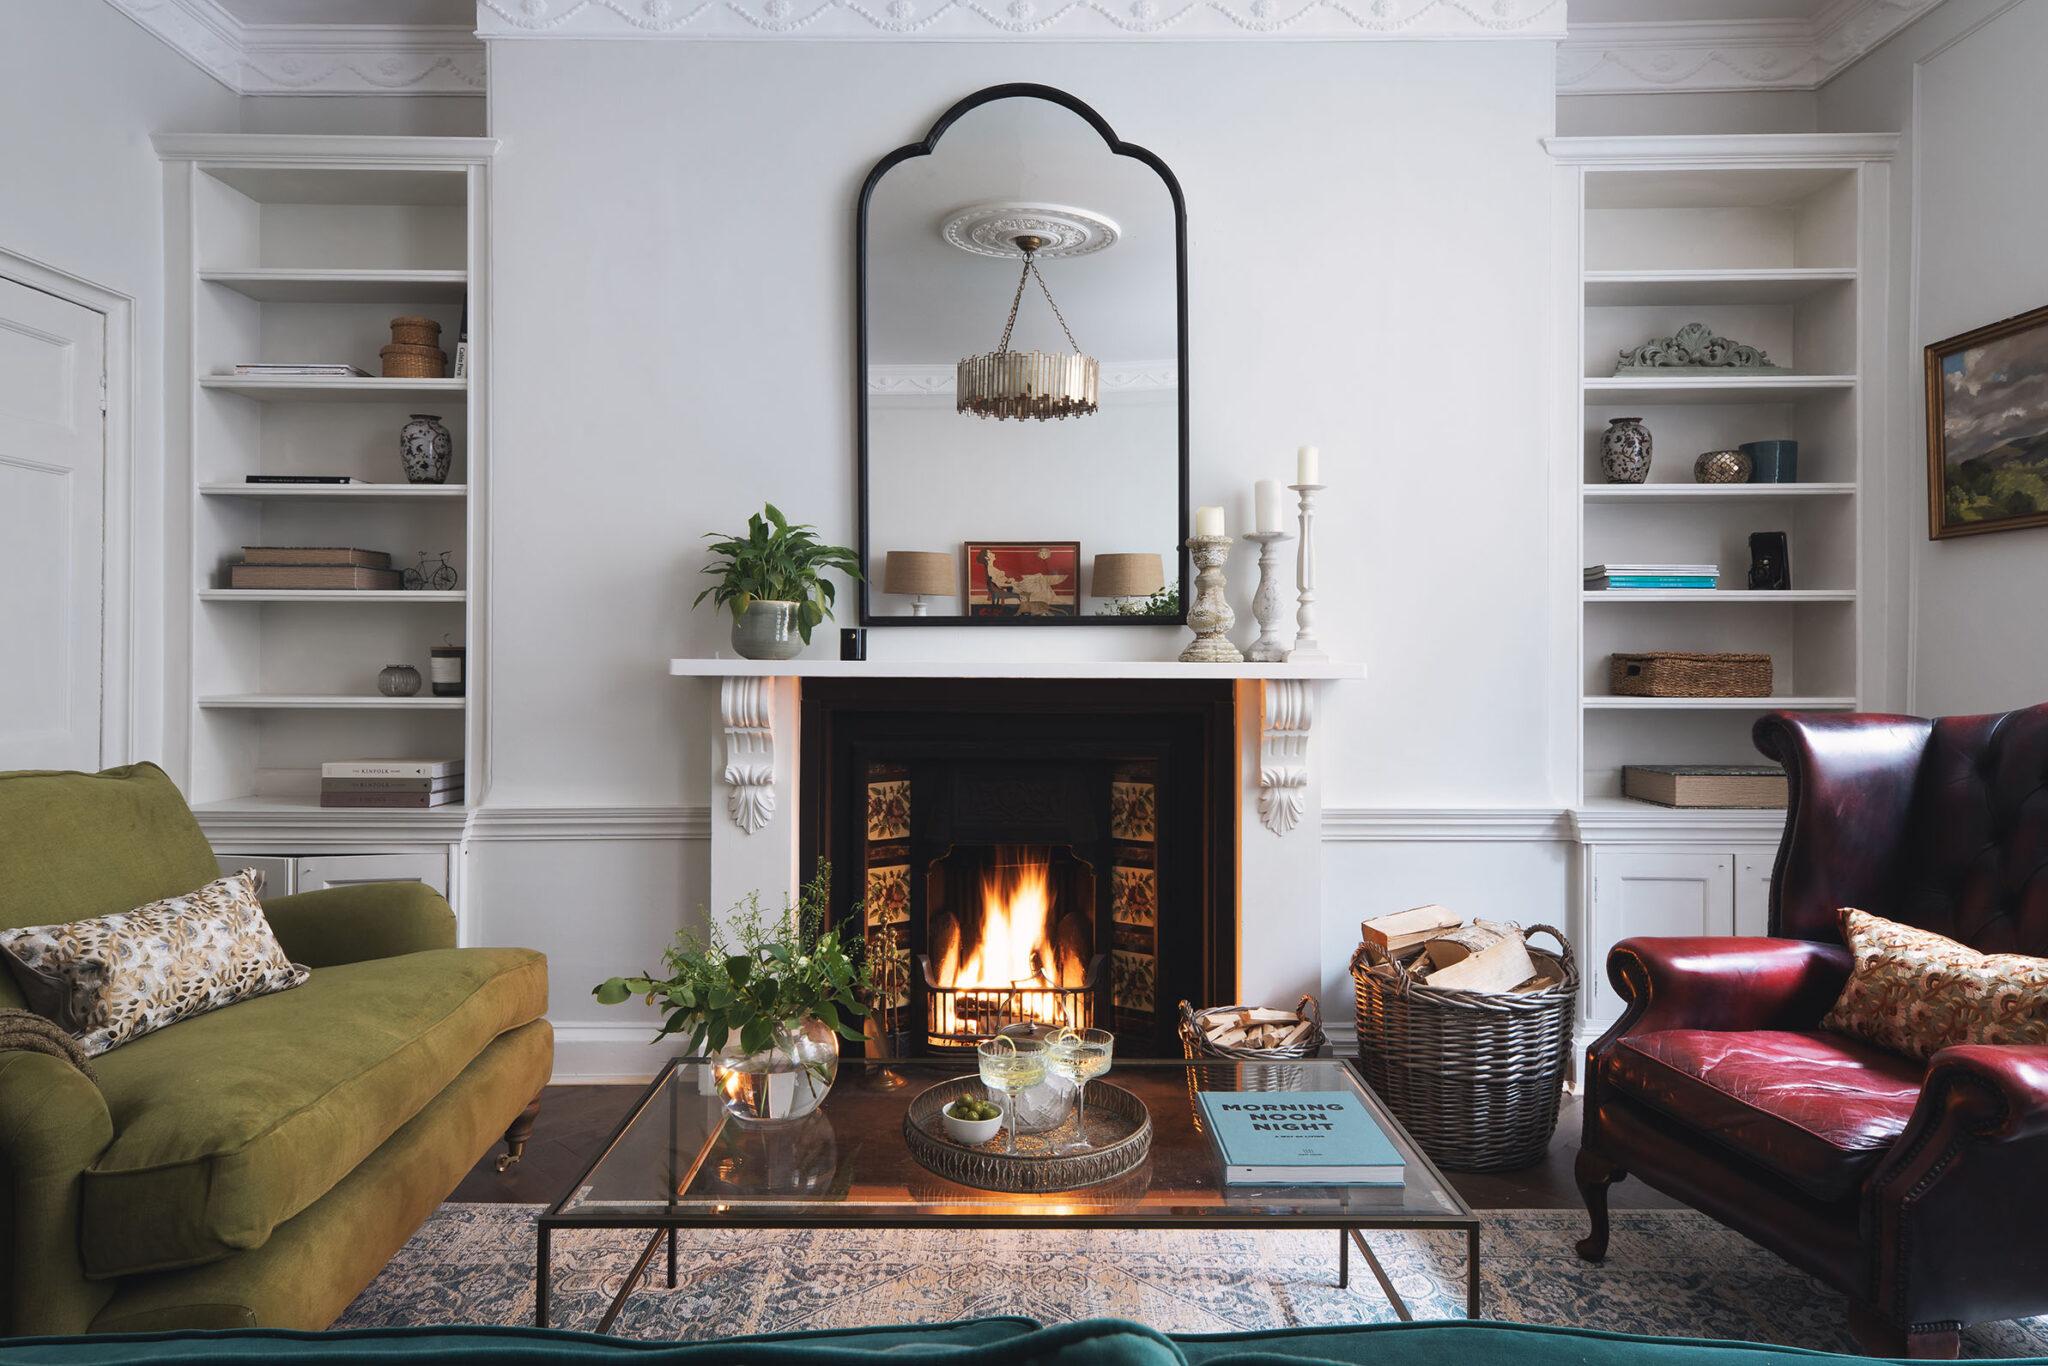 velvet sofas and open fire with mirror overhead